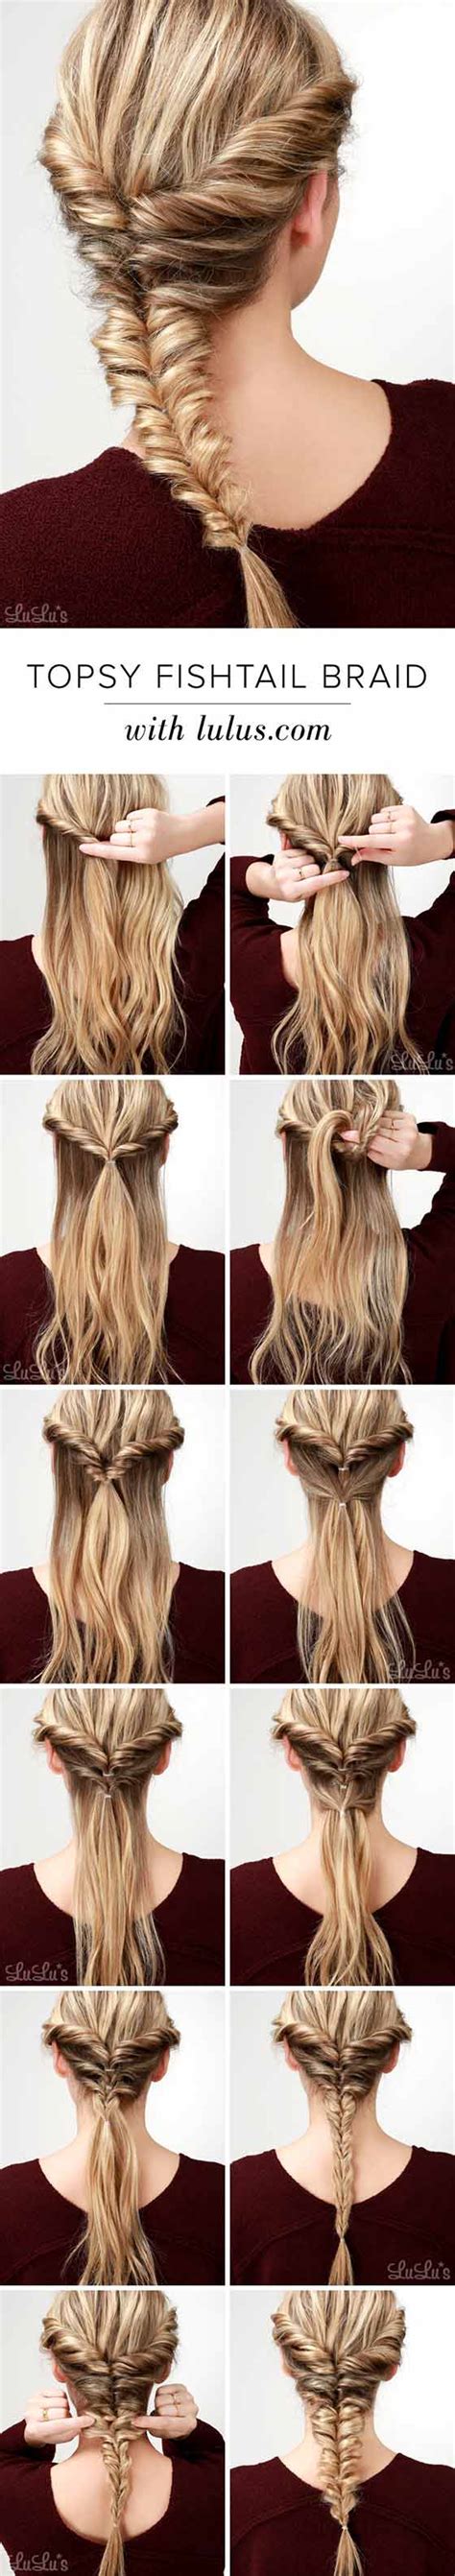 40 Braided Hairstyles For Long Hair